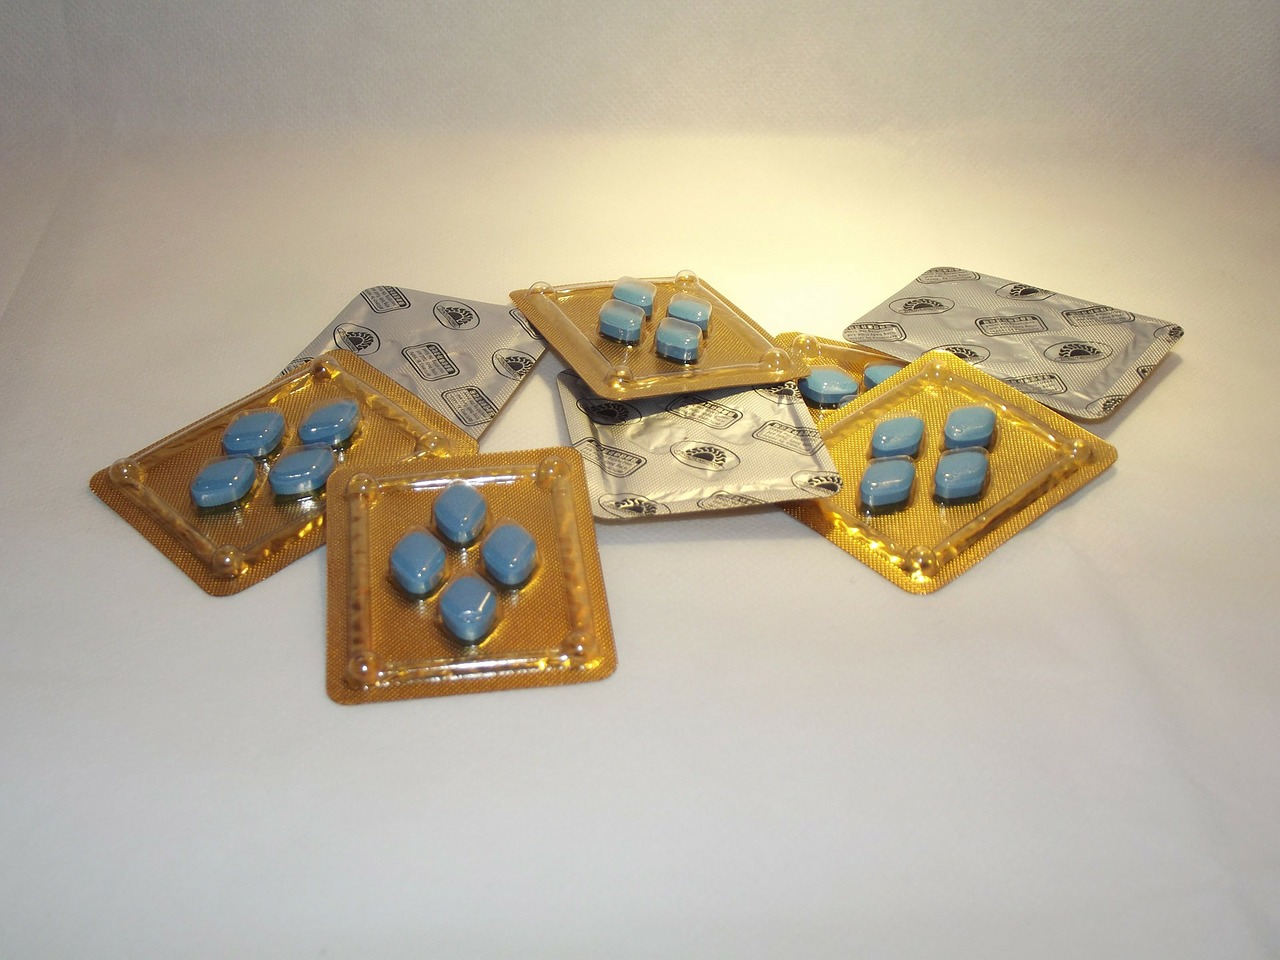 Eight packets of blue, diamond-shaped viagra pills in a pile on a white surface.